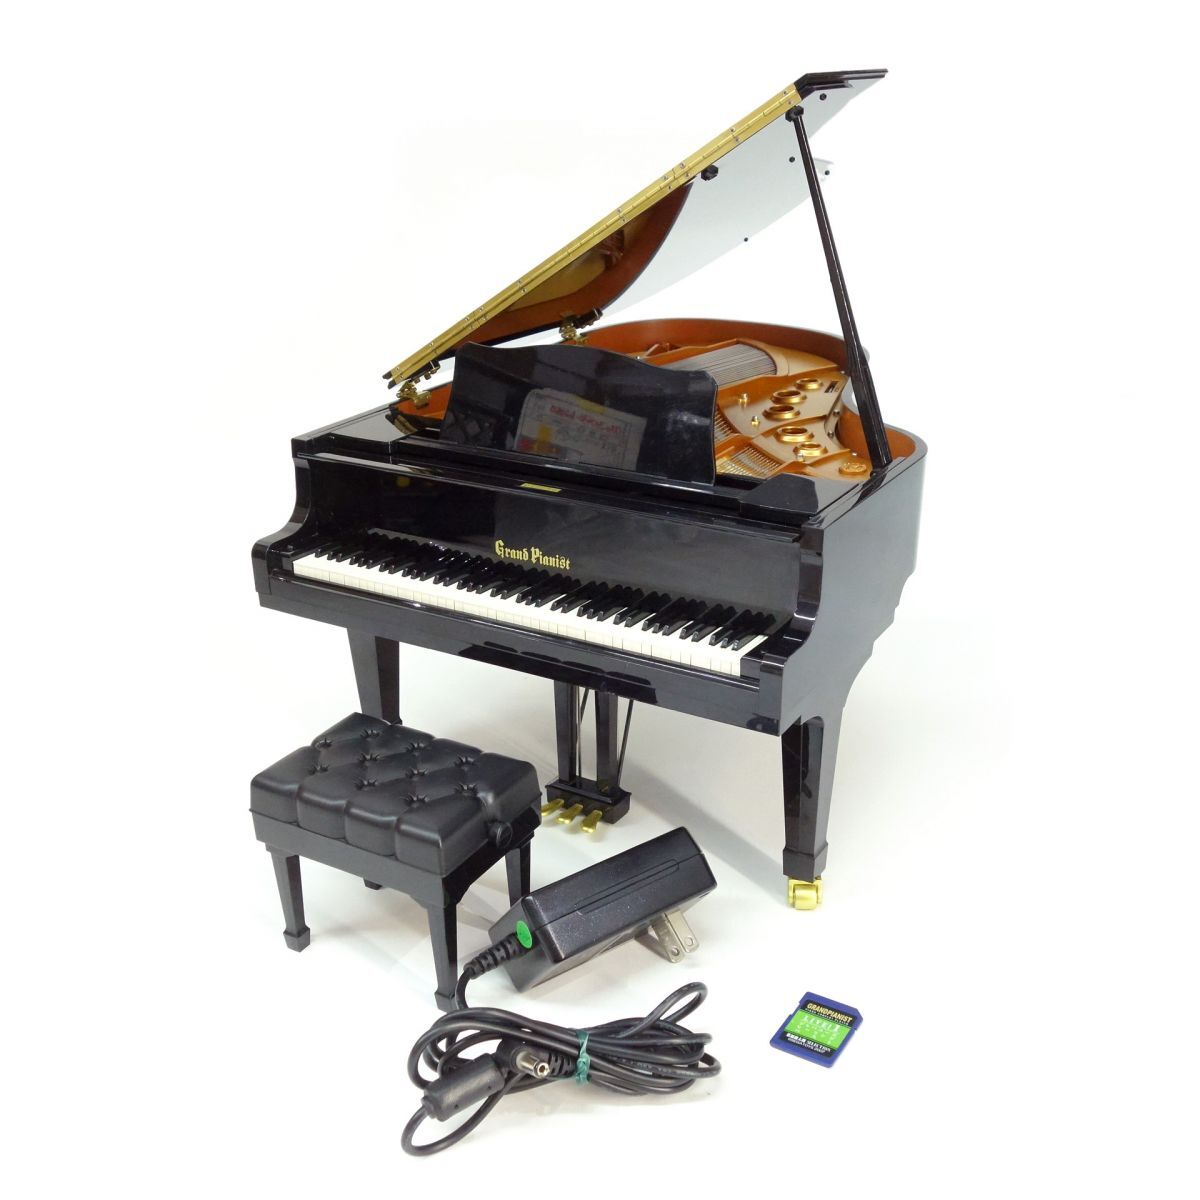 106 SEGA TOYS/ Sega toys Grand Pianist automatic, manual musical performance music reproduction SD card attaching * used / present condition goods 